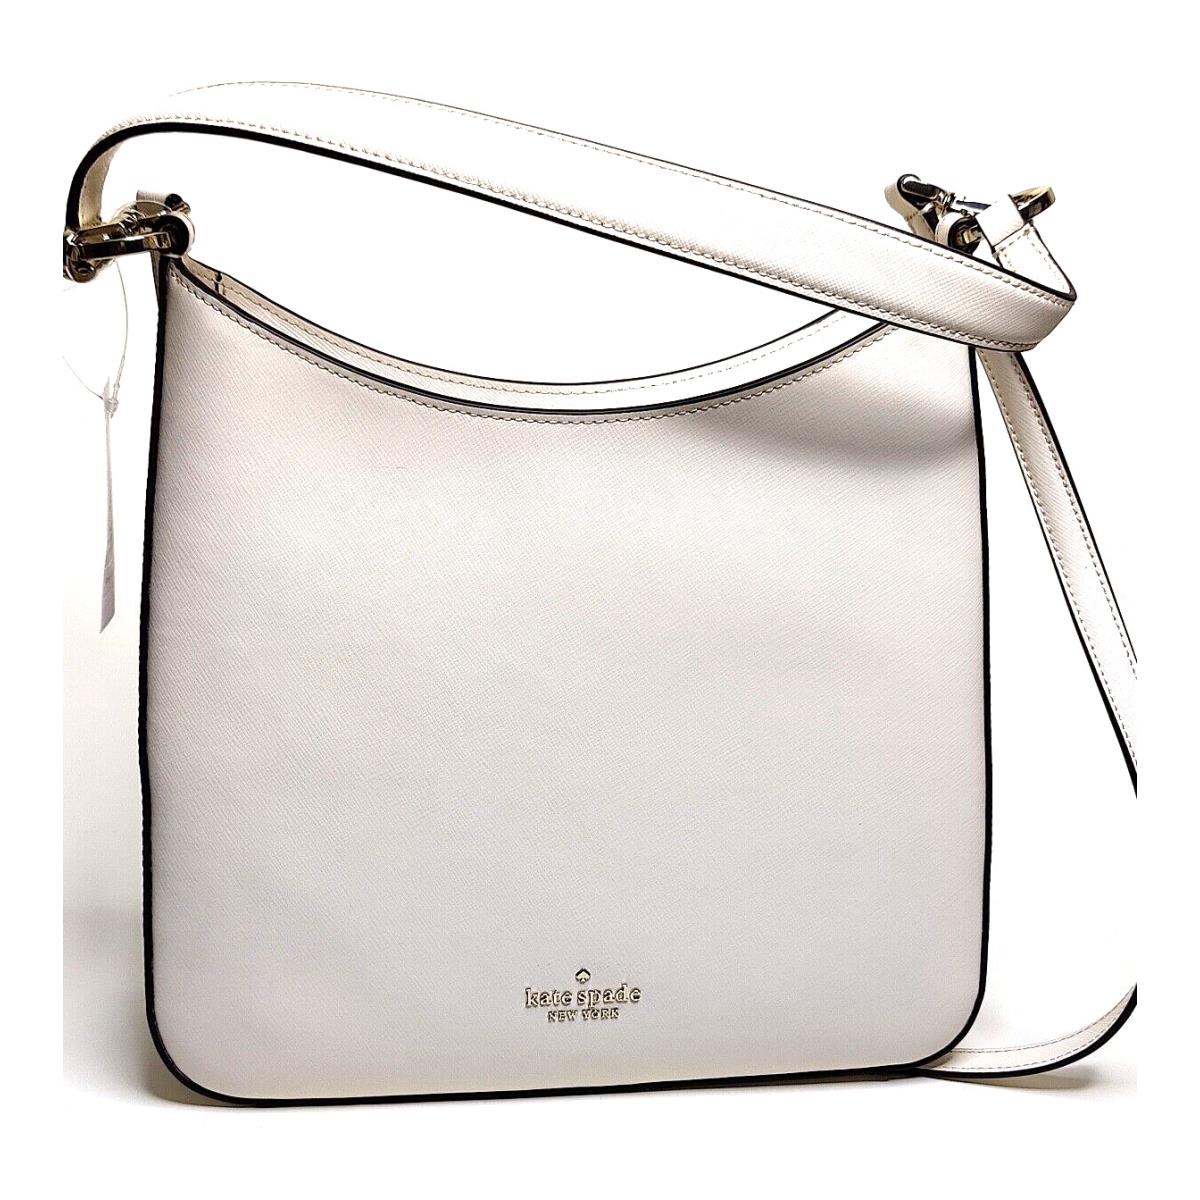 New Kate Spade Perry Leather Shoulder Bag In Parchment White K8695